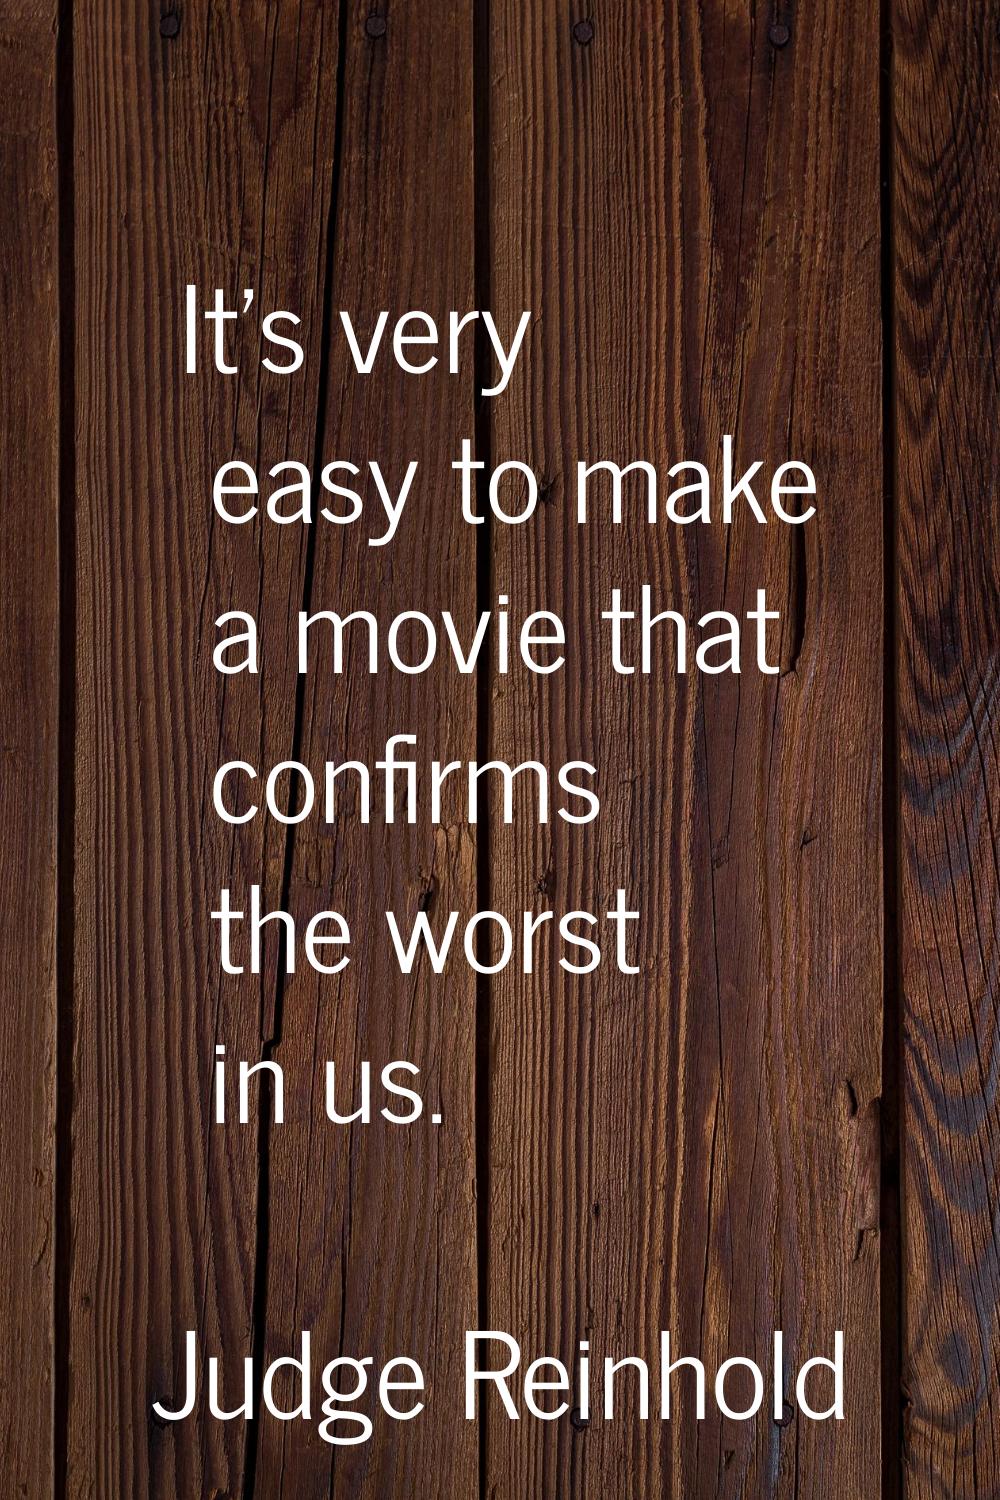 It's very easy to make a movie that confirms the worst in us.